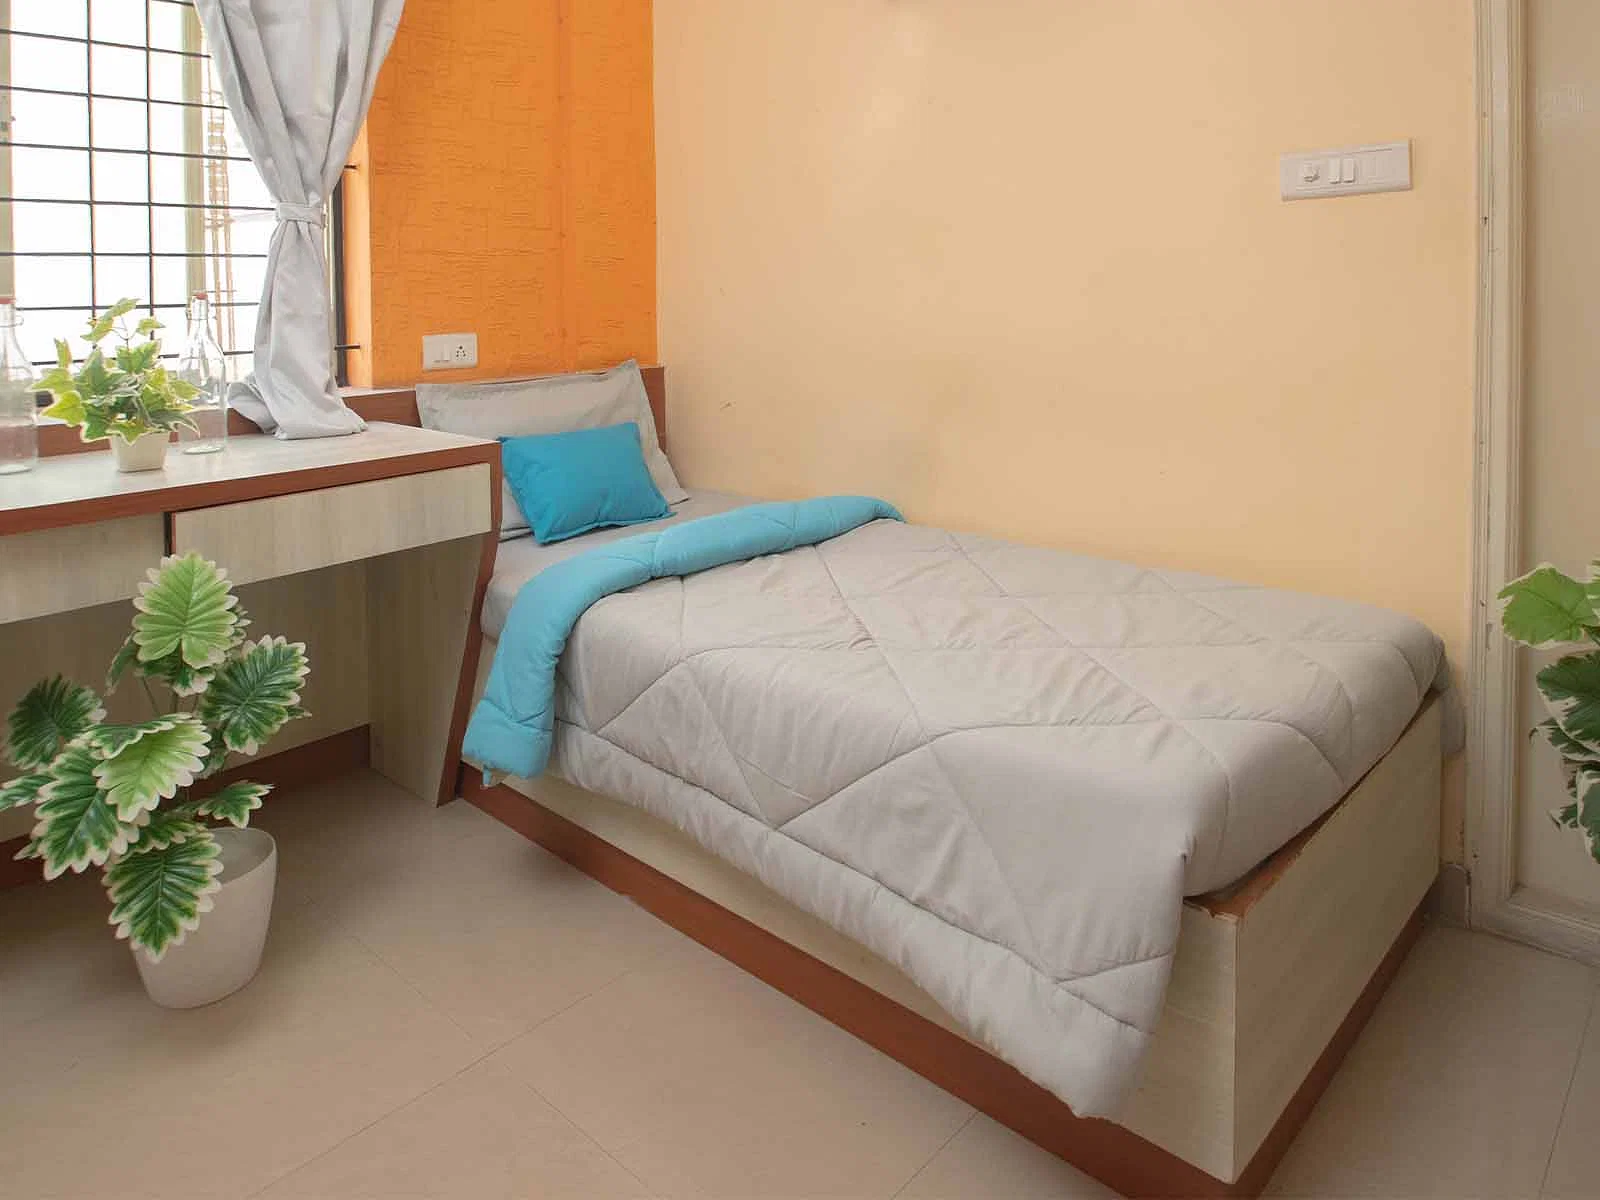 fully furnished Zolo single rooms for rent near me-check out now-Zolo Heaven C